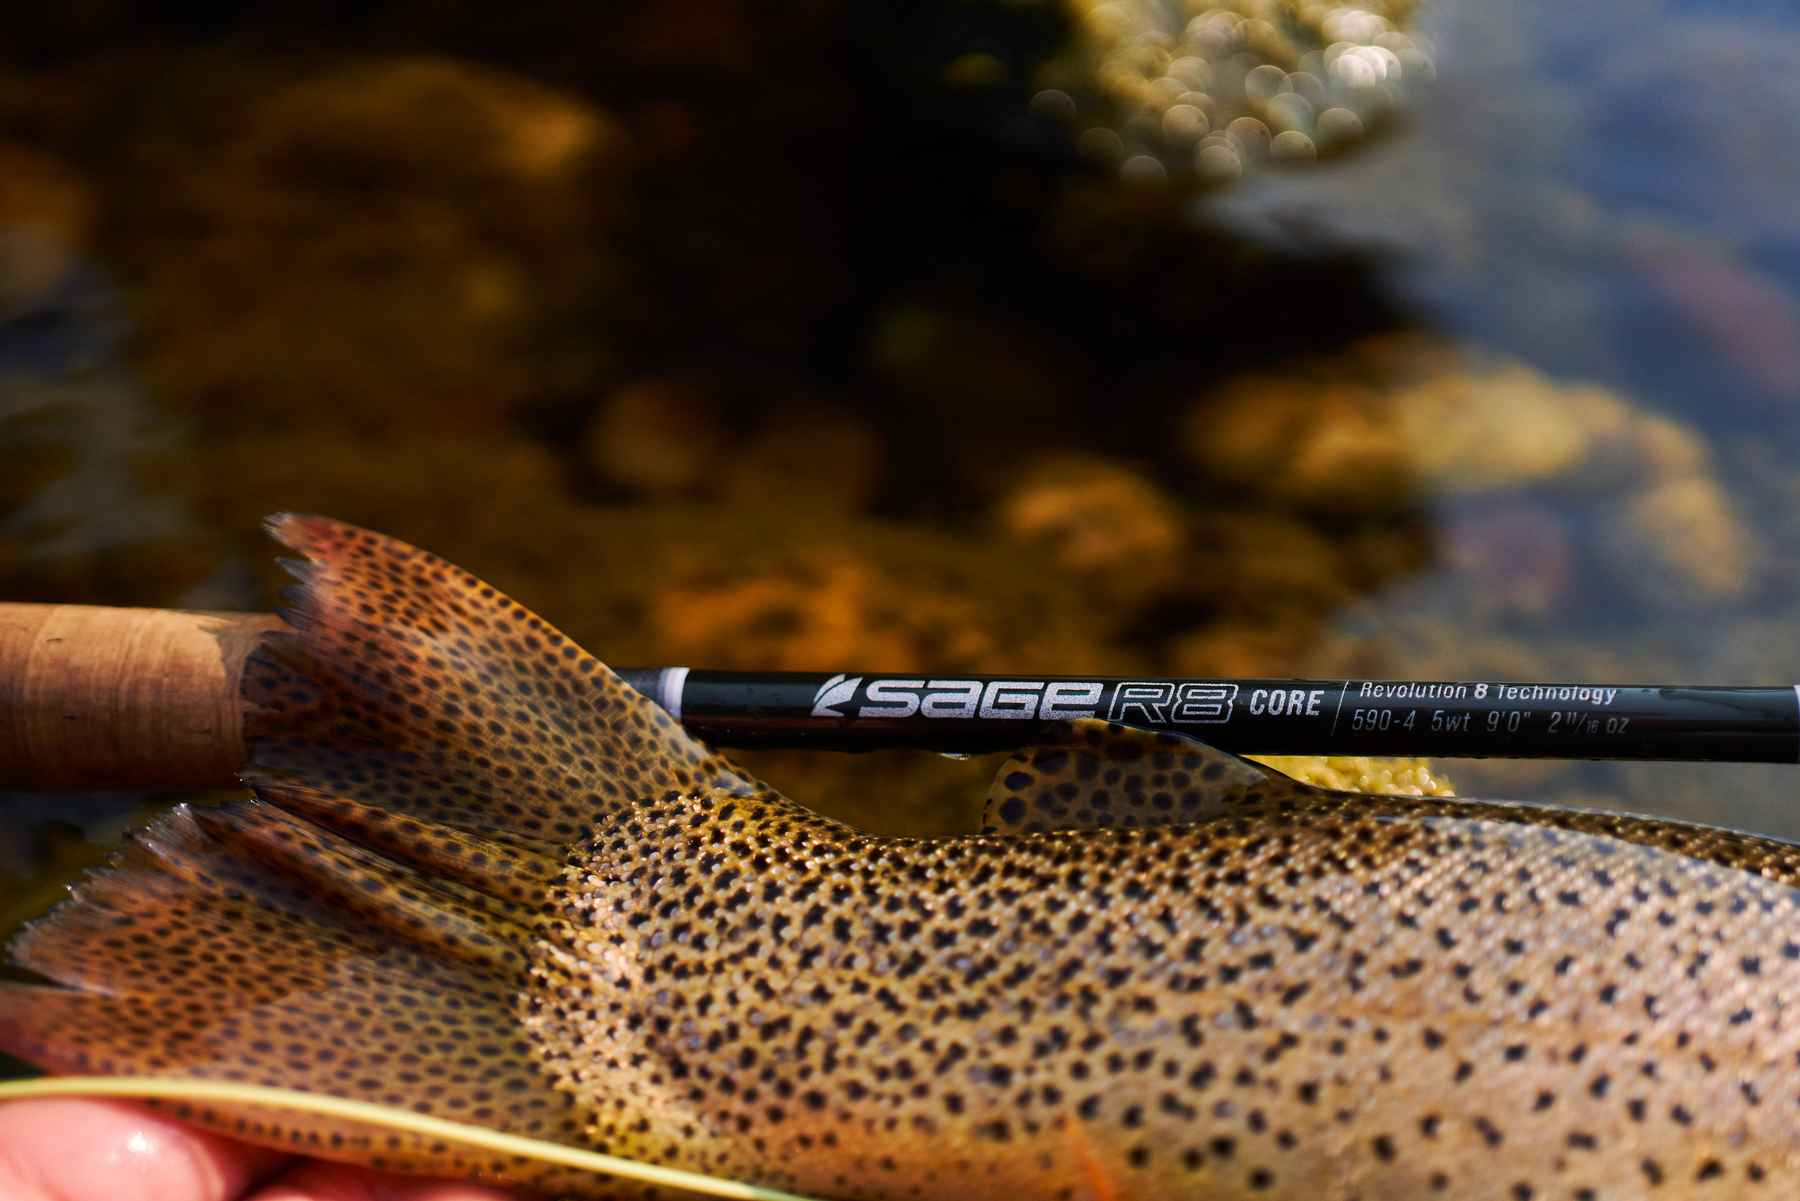 Redington Classic Trout Fly Rod - Fin & Fire Fly Shop